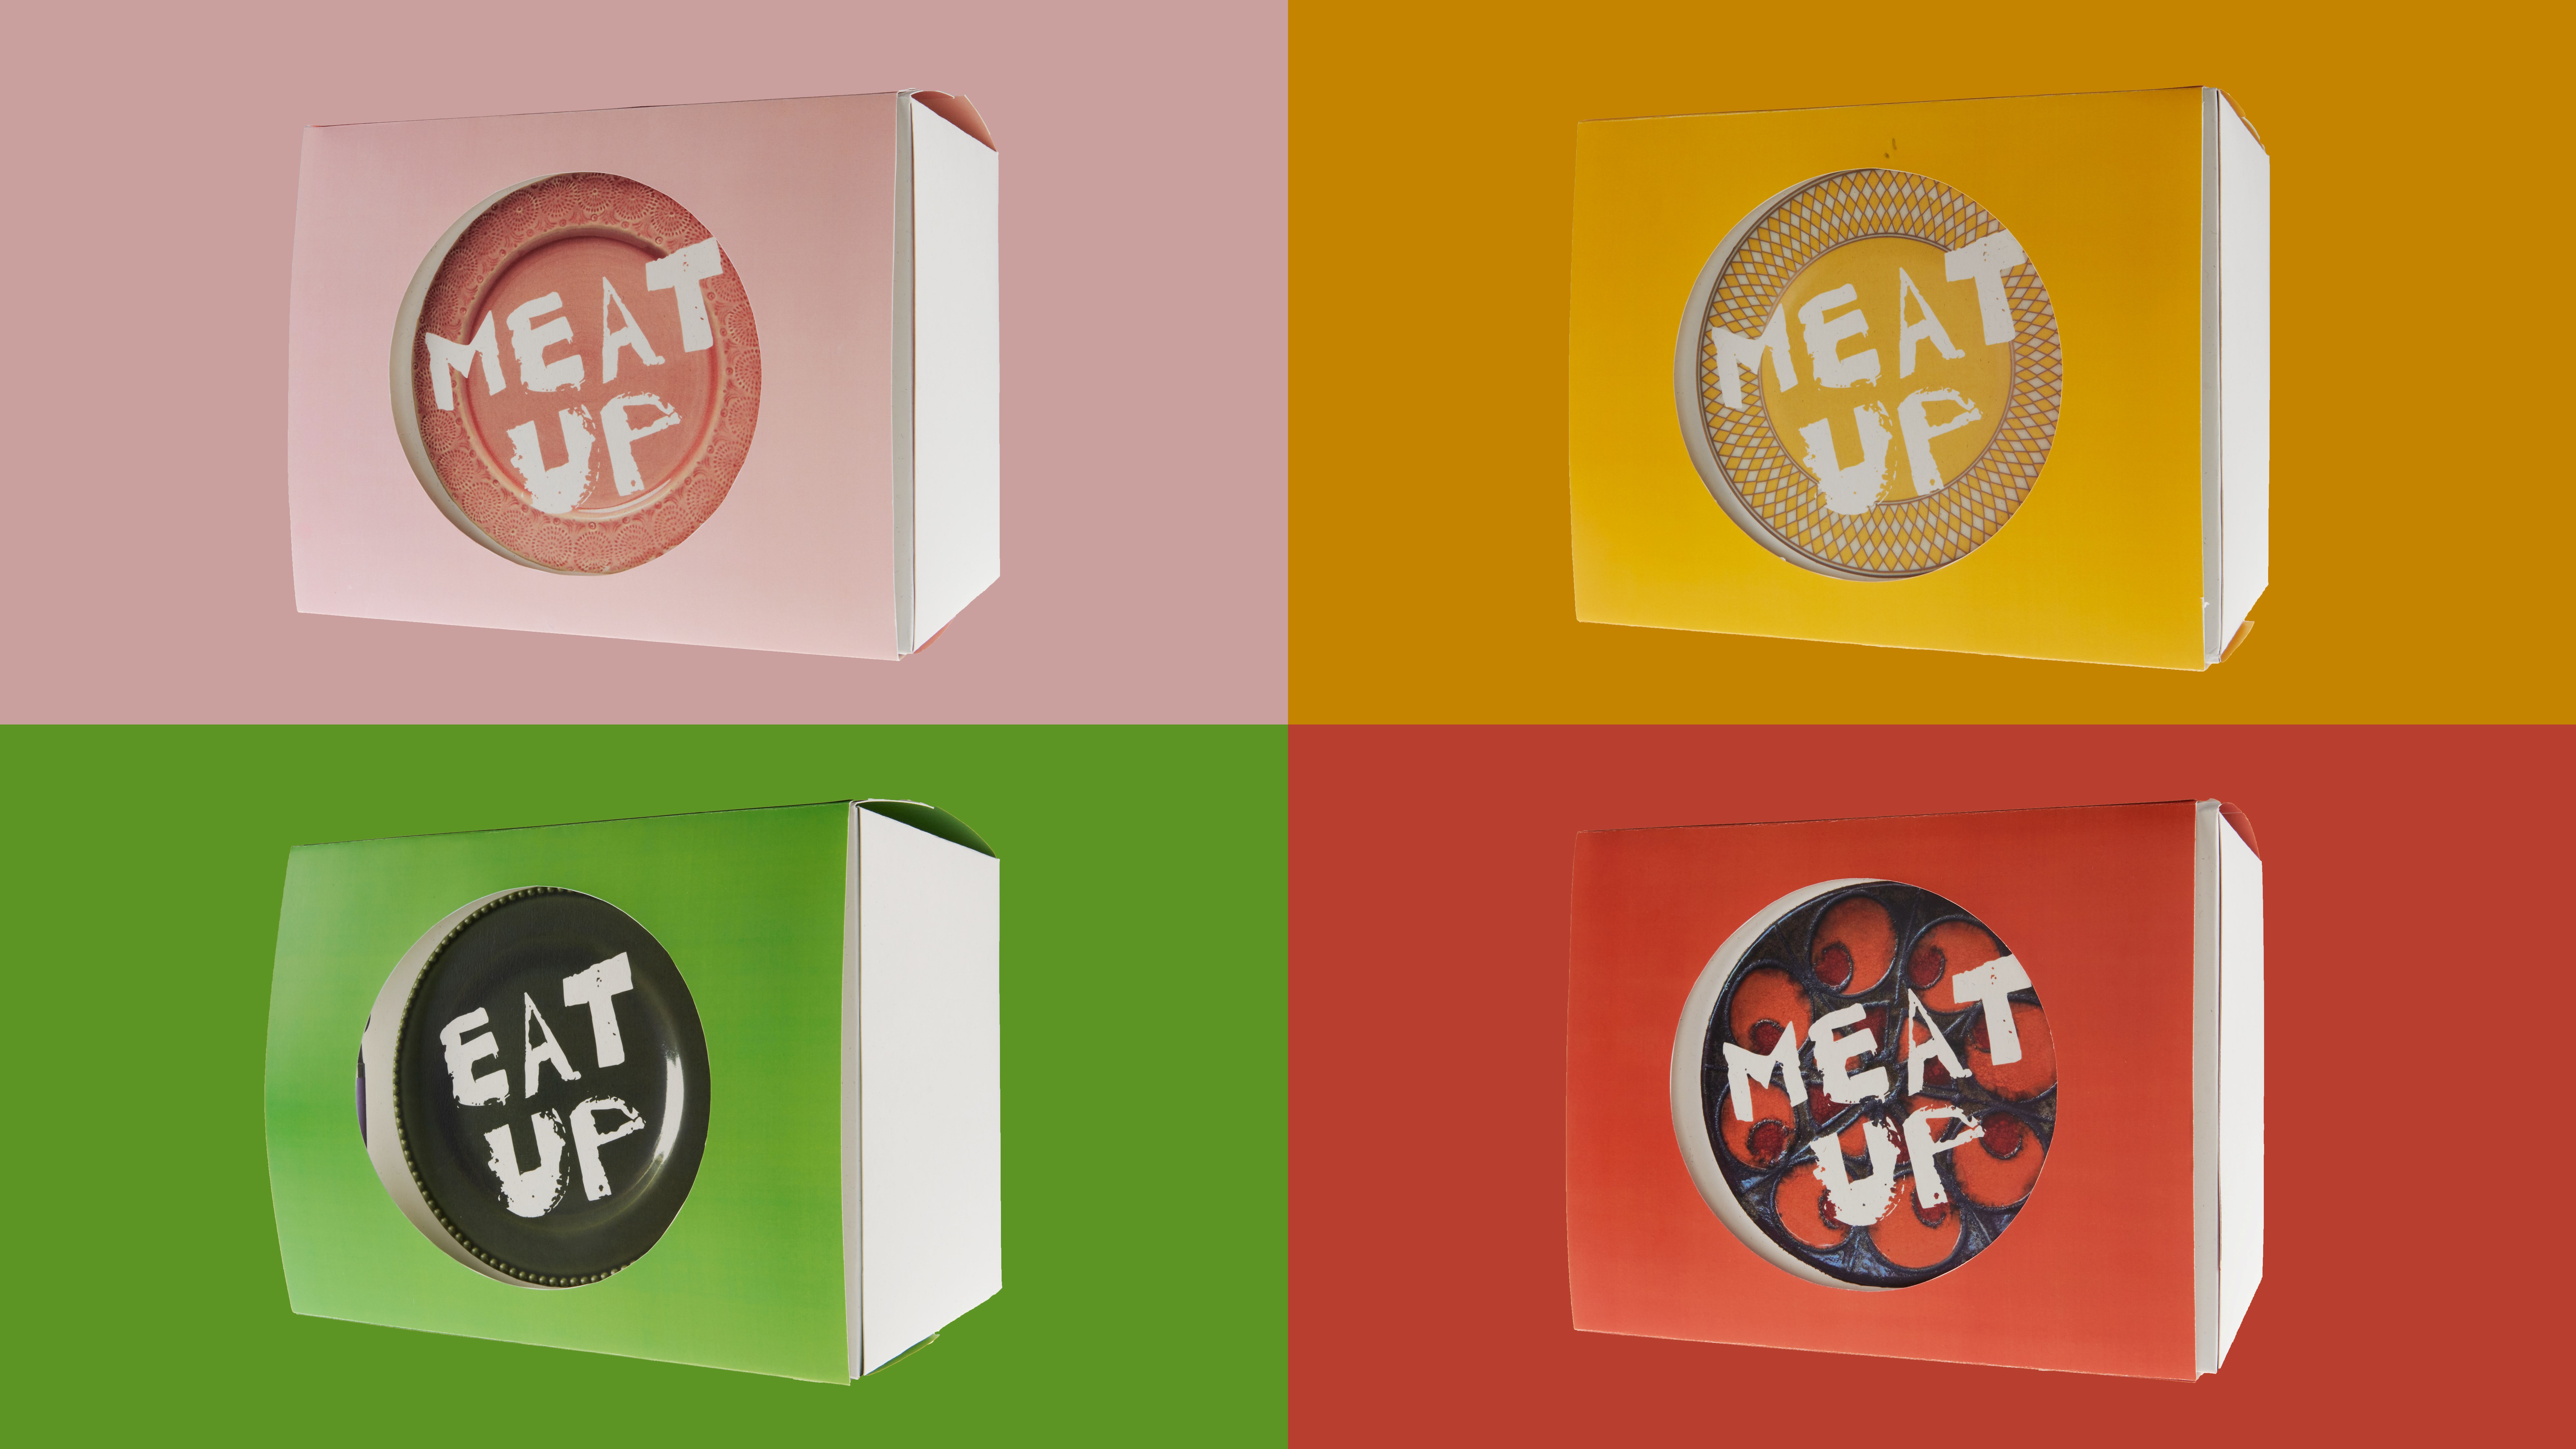 Thumbnail of promotional video to show the brand world of Meat Up.